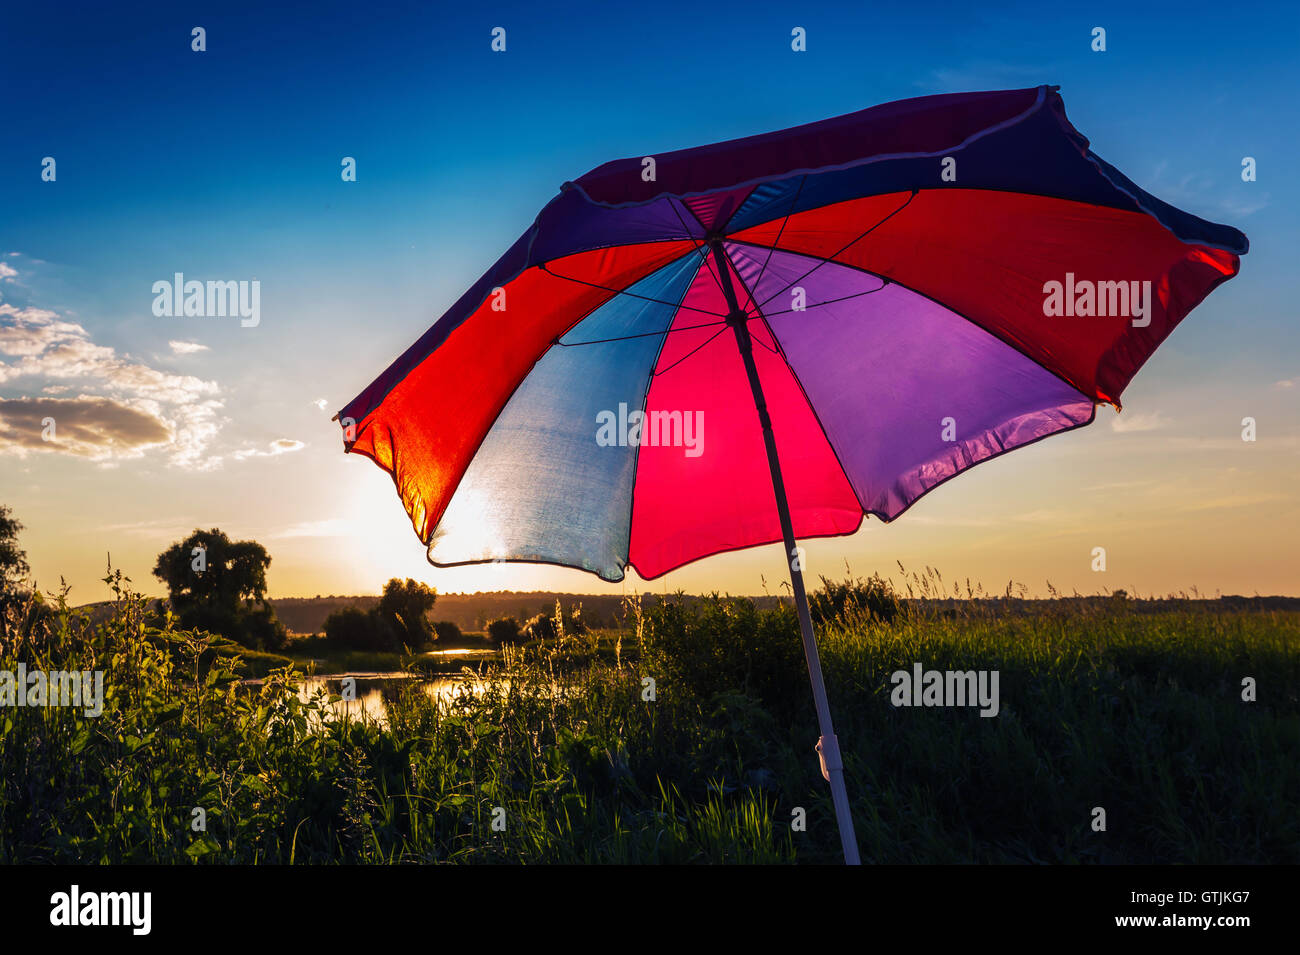 Colorful umbrella in the summer at sunset Stock Photo